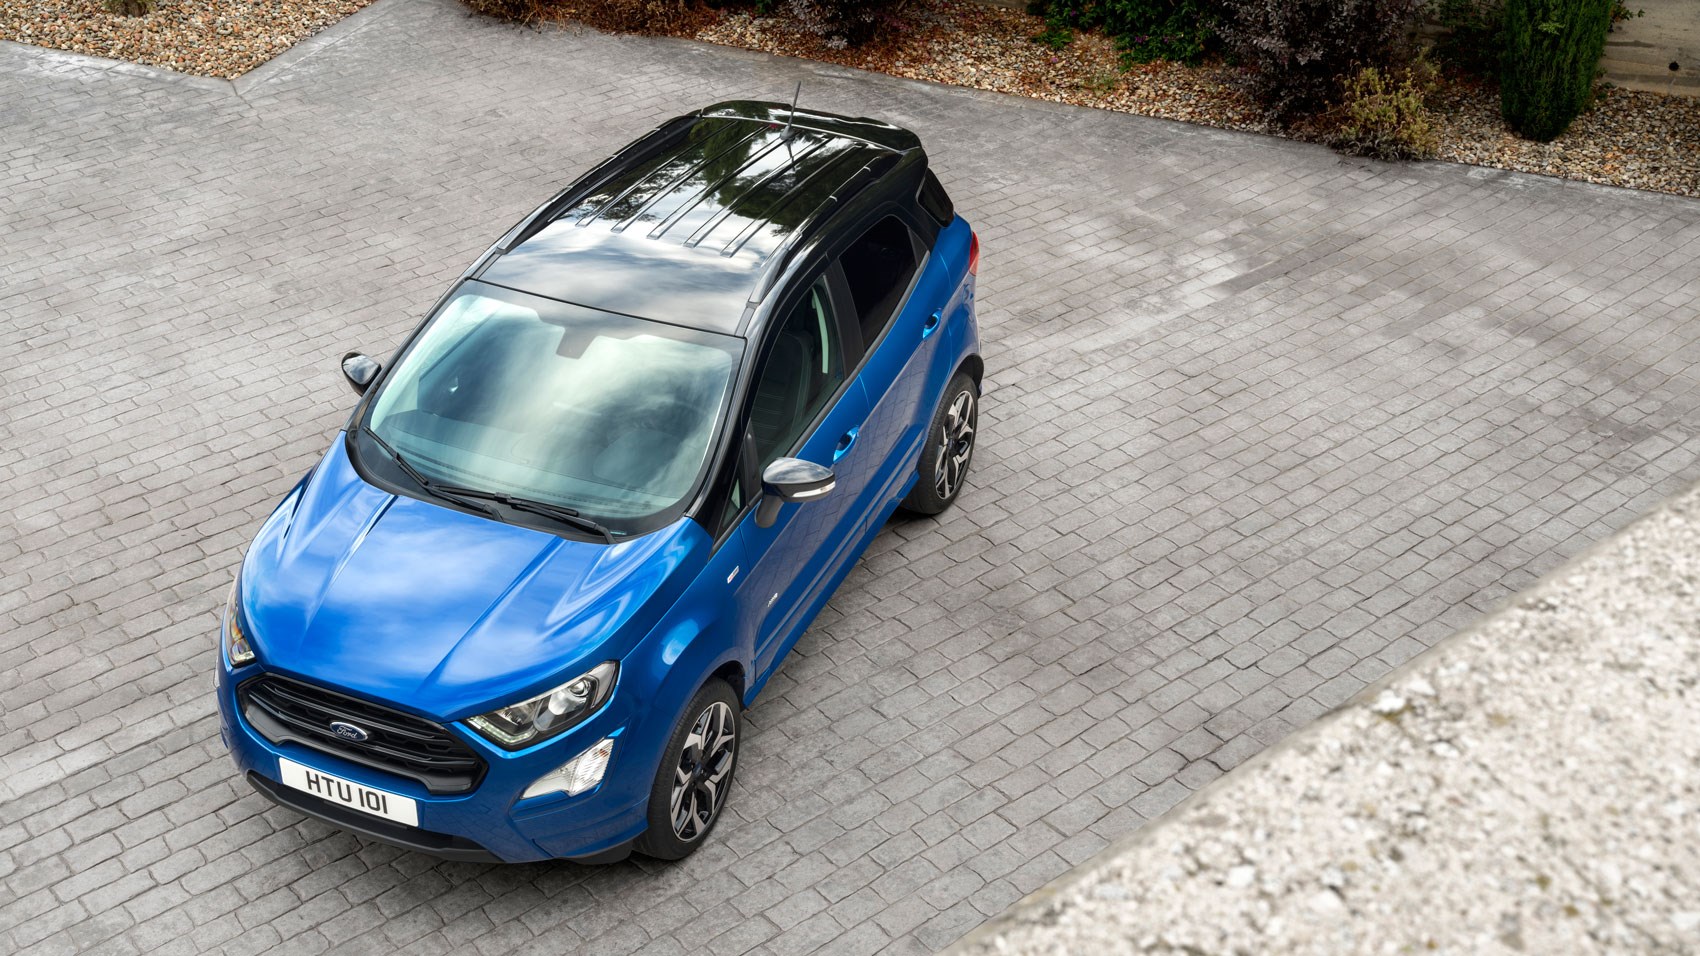 Ford EcoSport (2018) review: better, but still not the best